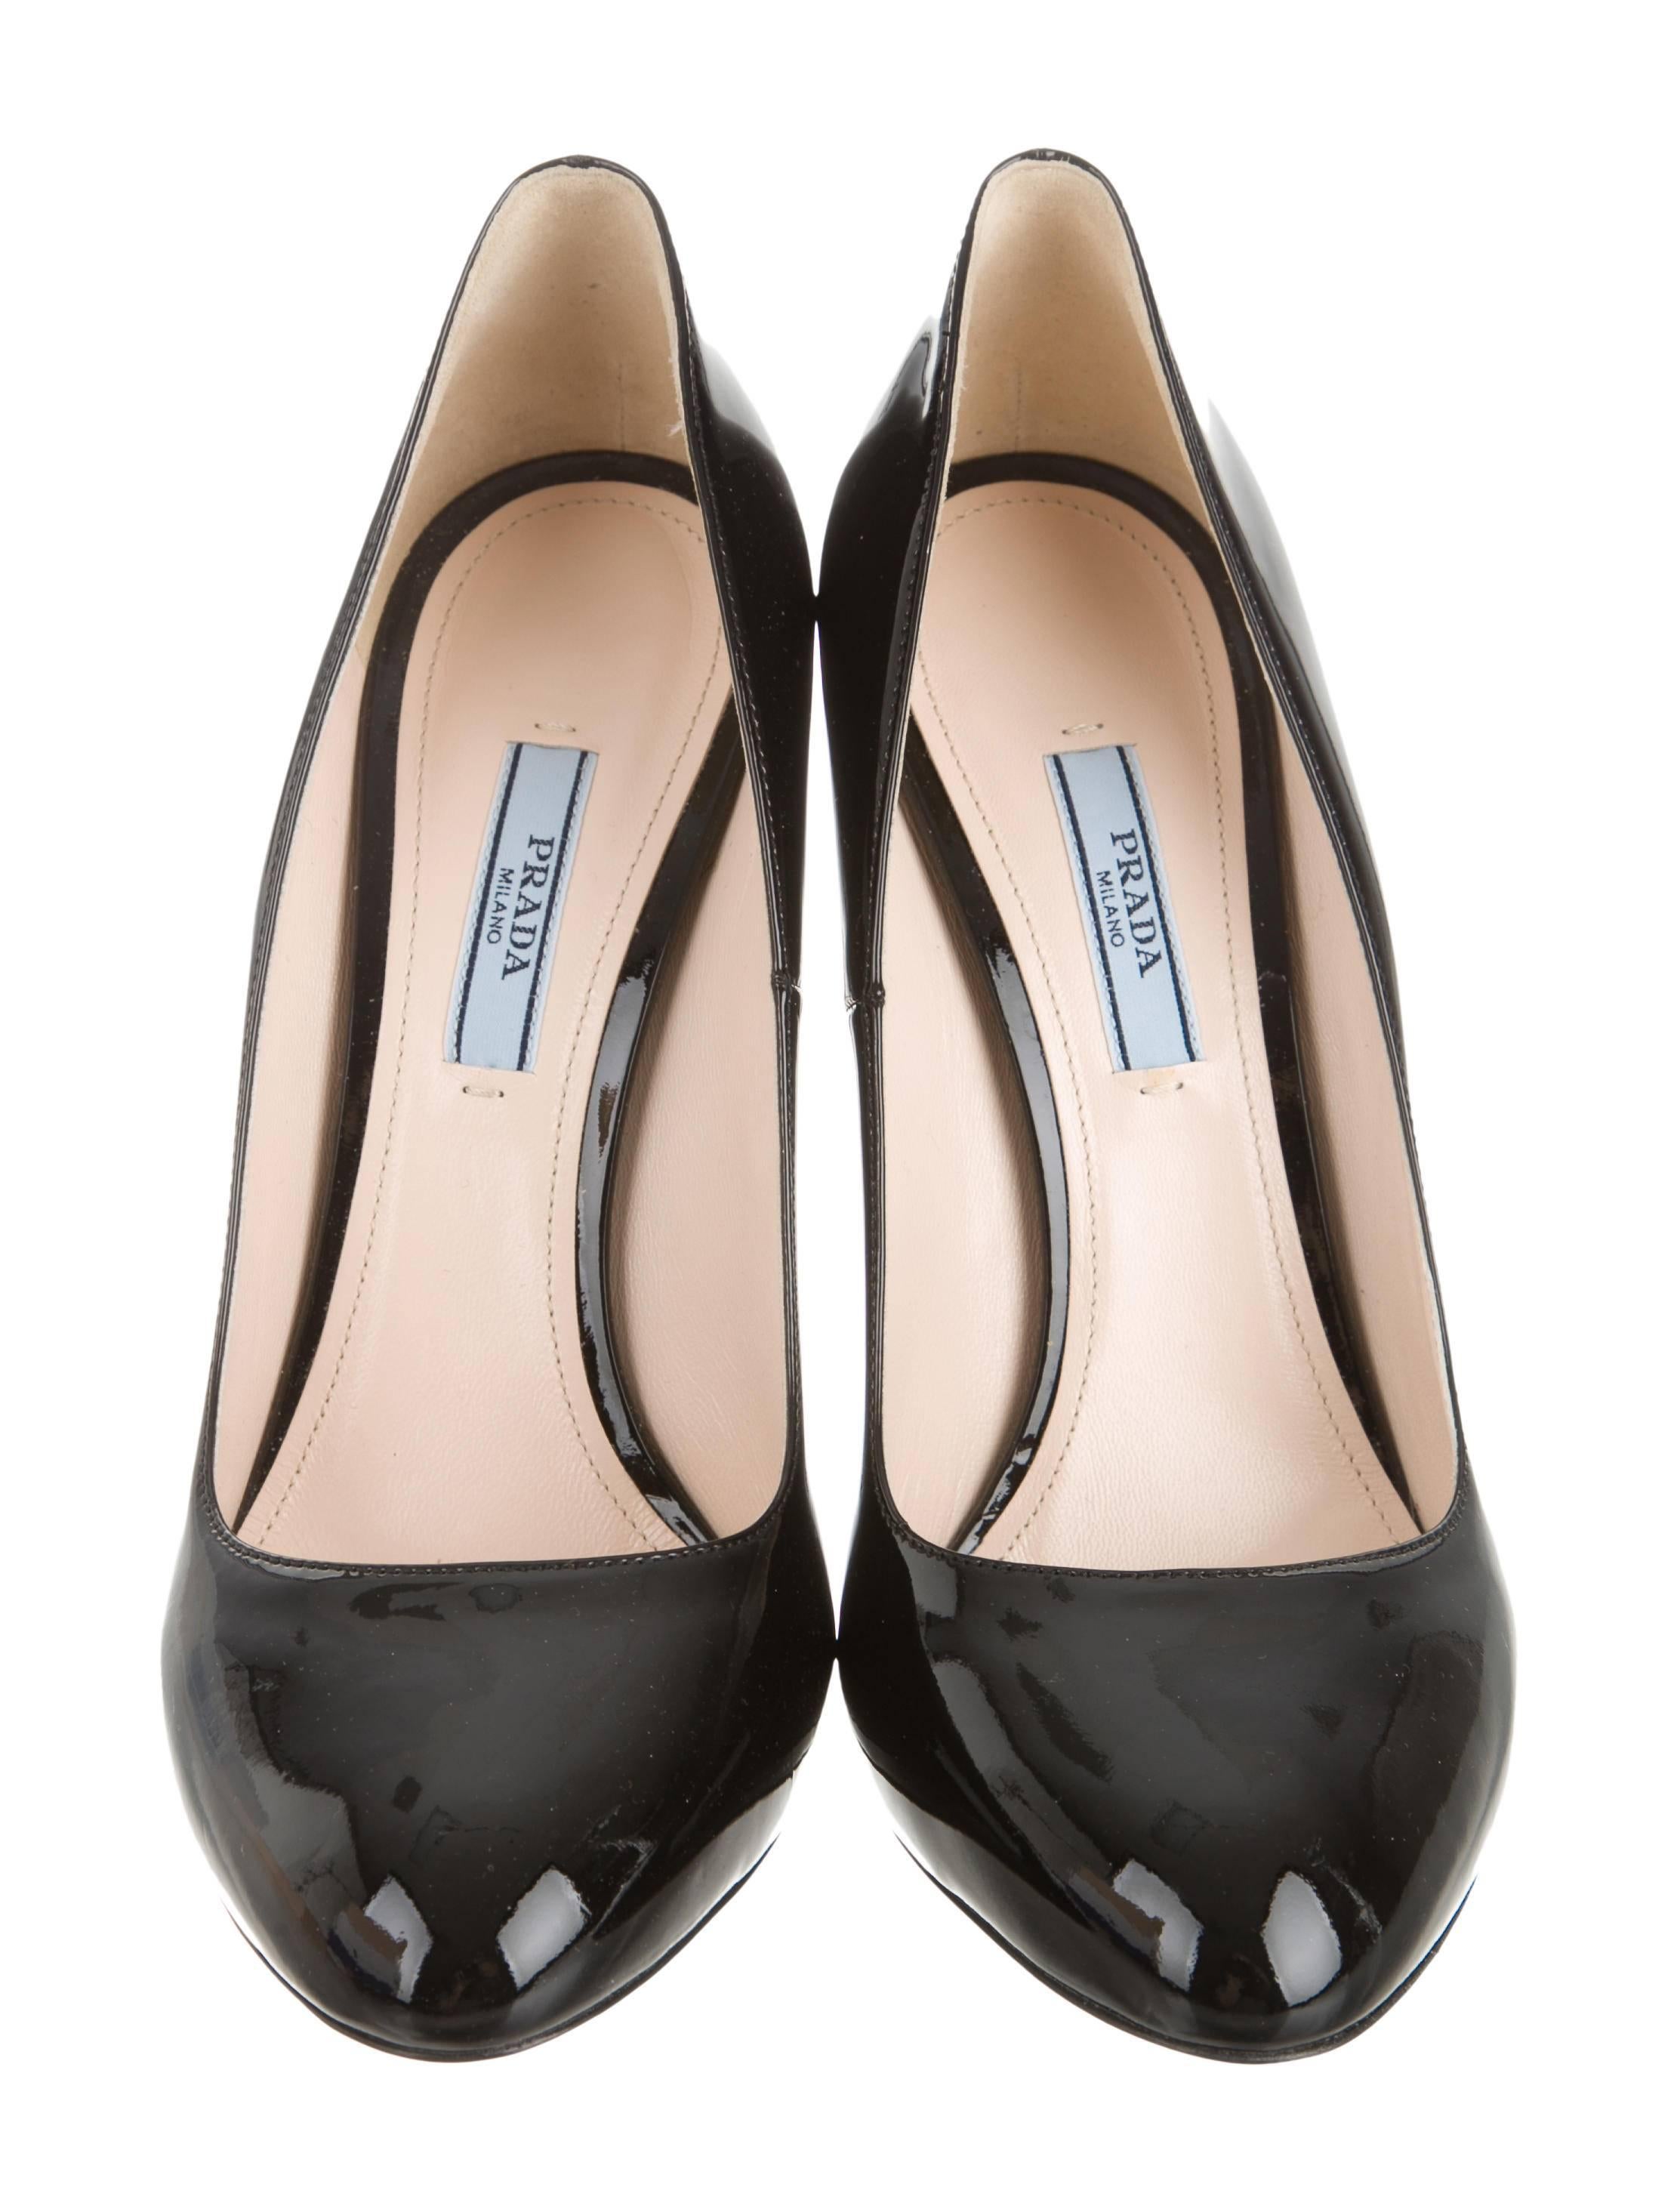 CURATOR'S NOTES

Black patent leather Prada pumps with semi pointed toes, tonal stitching and silver-tone covered heels. Includes original Prada box and dust bag.

Size IT 39.5 (US 9.5)
Patent leather
Silver hardware
Made in Italy
Heel